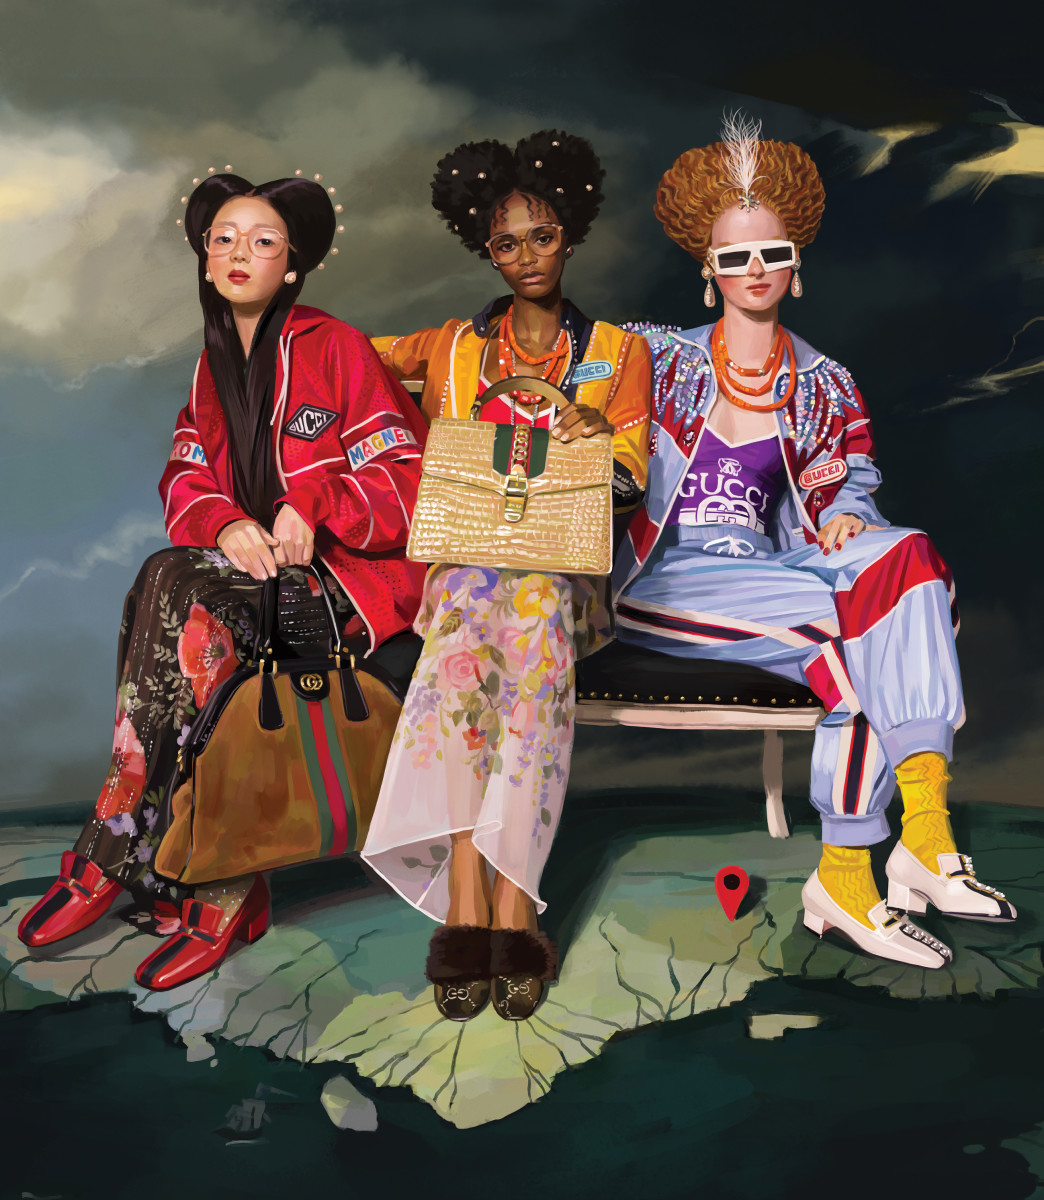 Egoïsme Brullen Spruit Gucci's Spring 2018 Campaign Is Pretty Much as Gucci as It Gets -  Fashionista